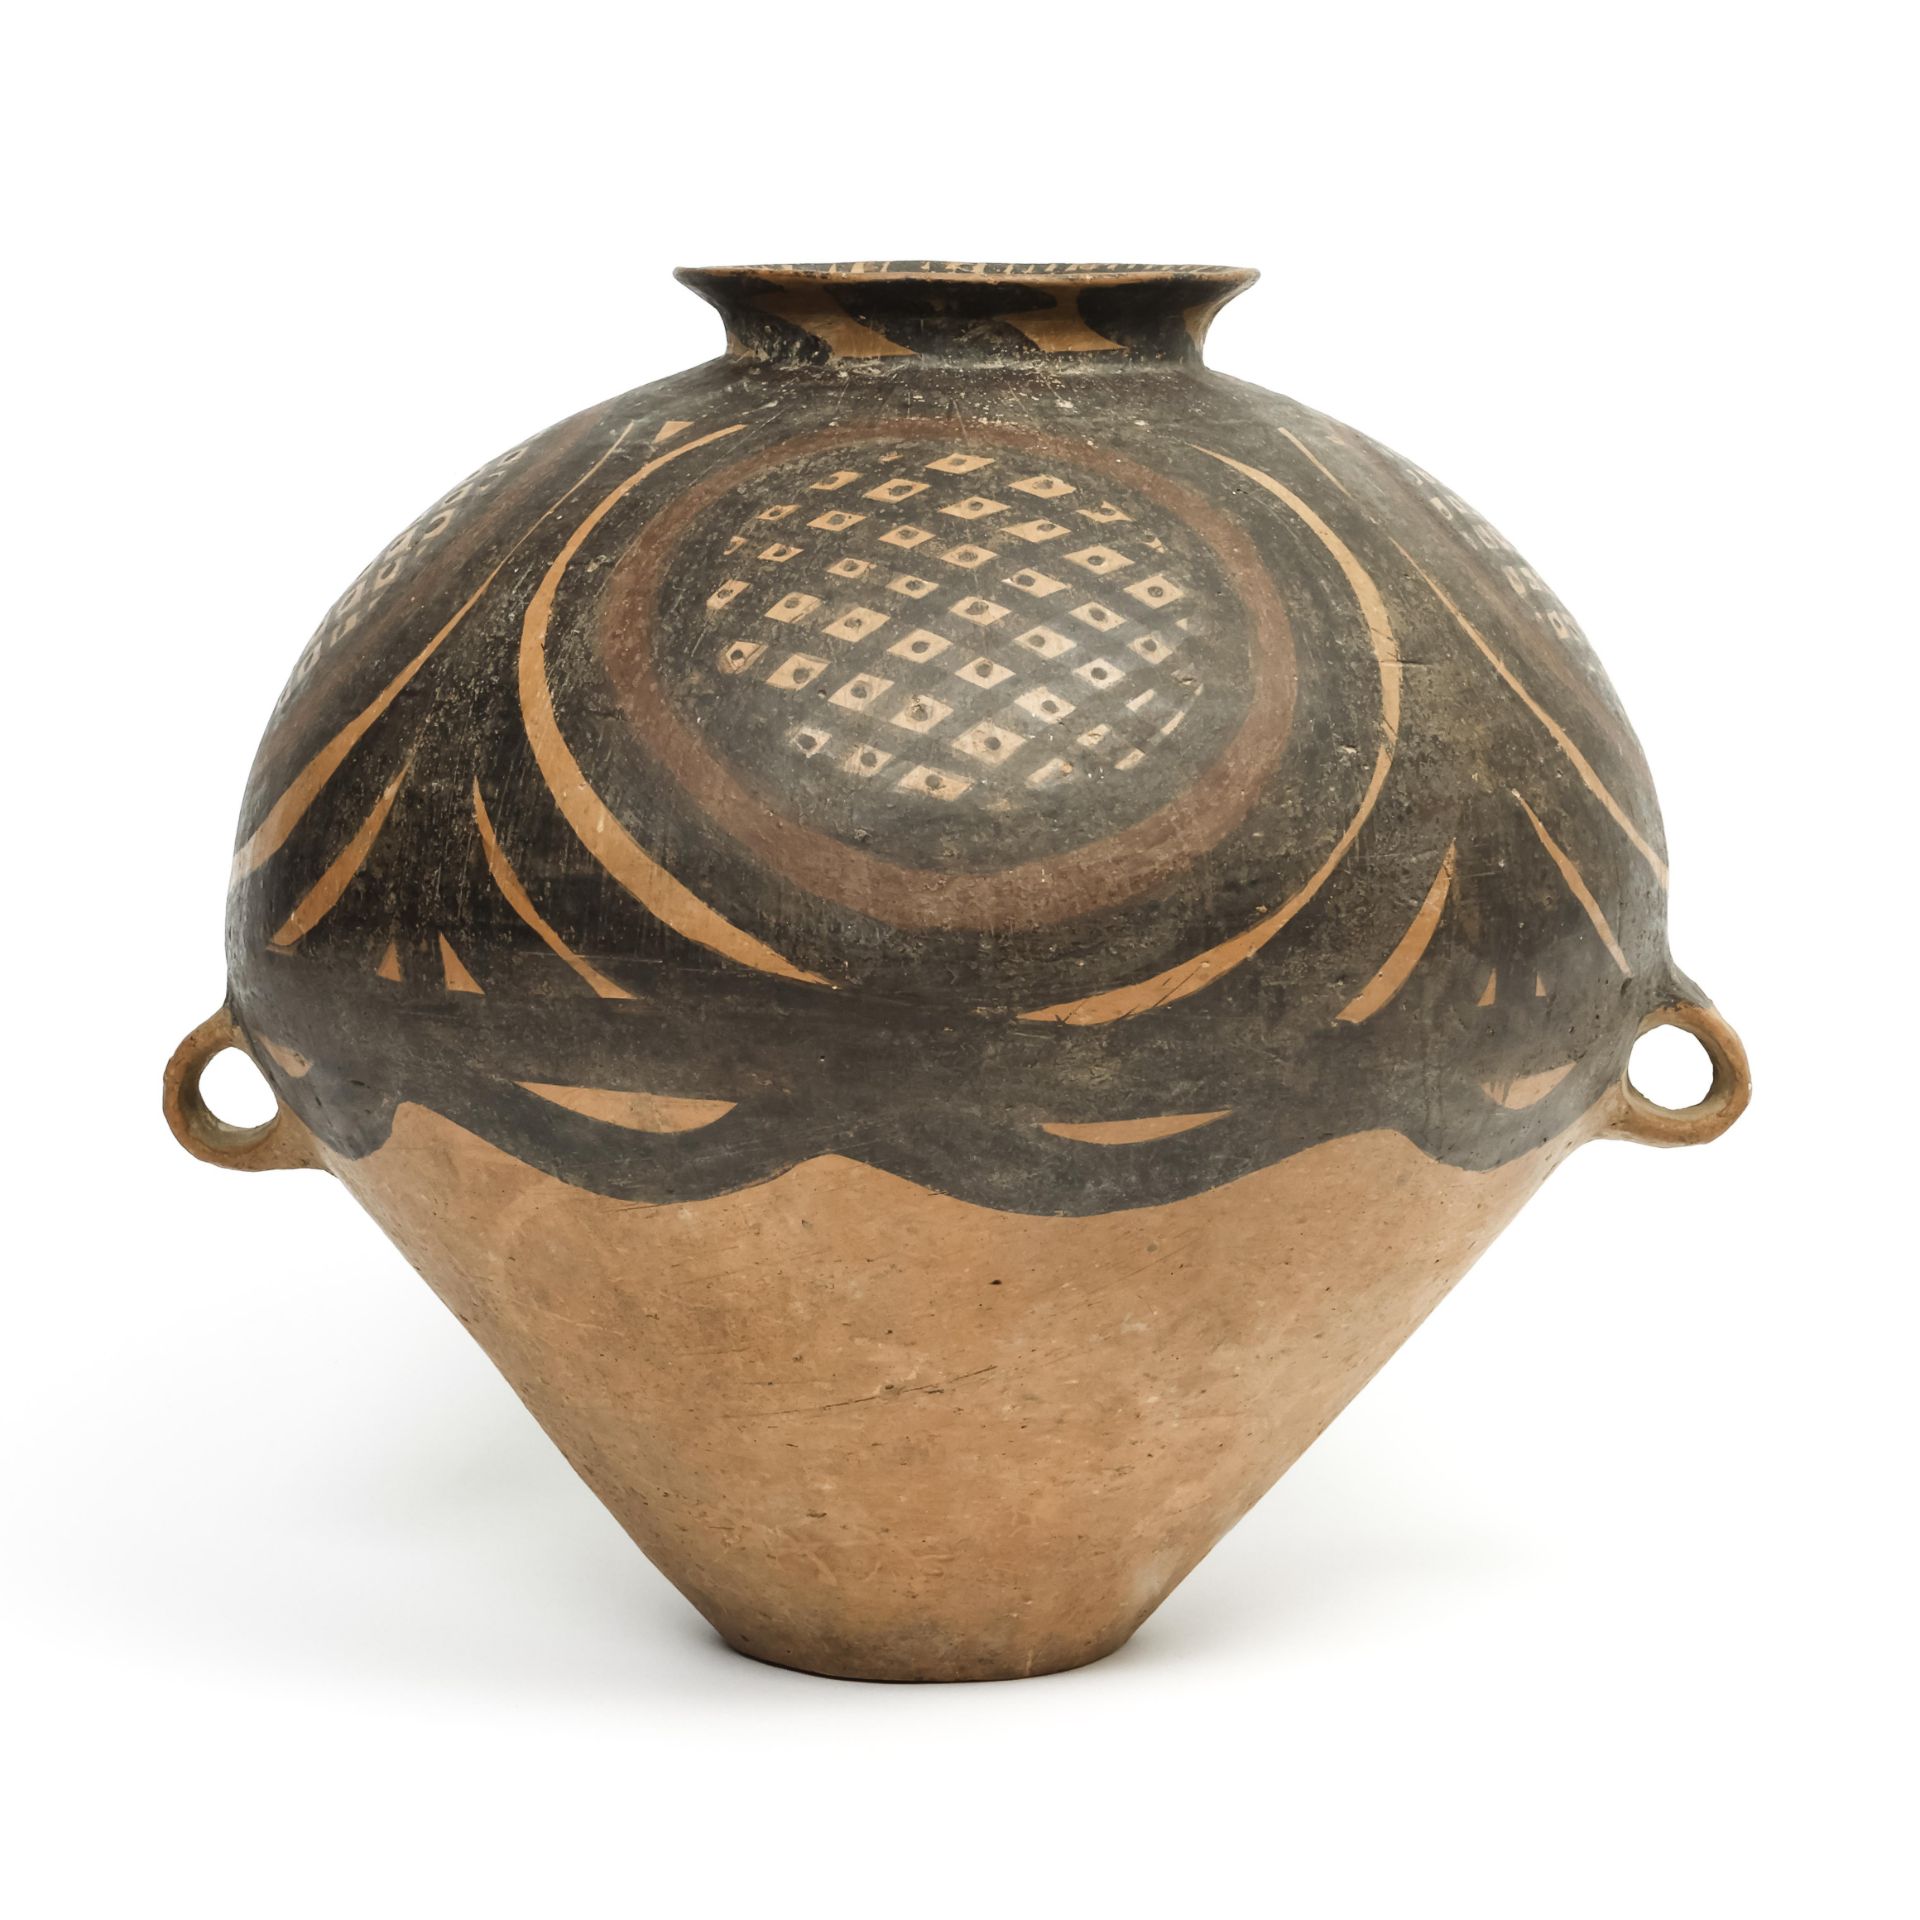 China, large earthenware pot, Majiayao culture, Machang phase, late 3rd millennium BC, - Image 2 of 6